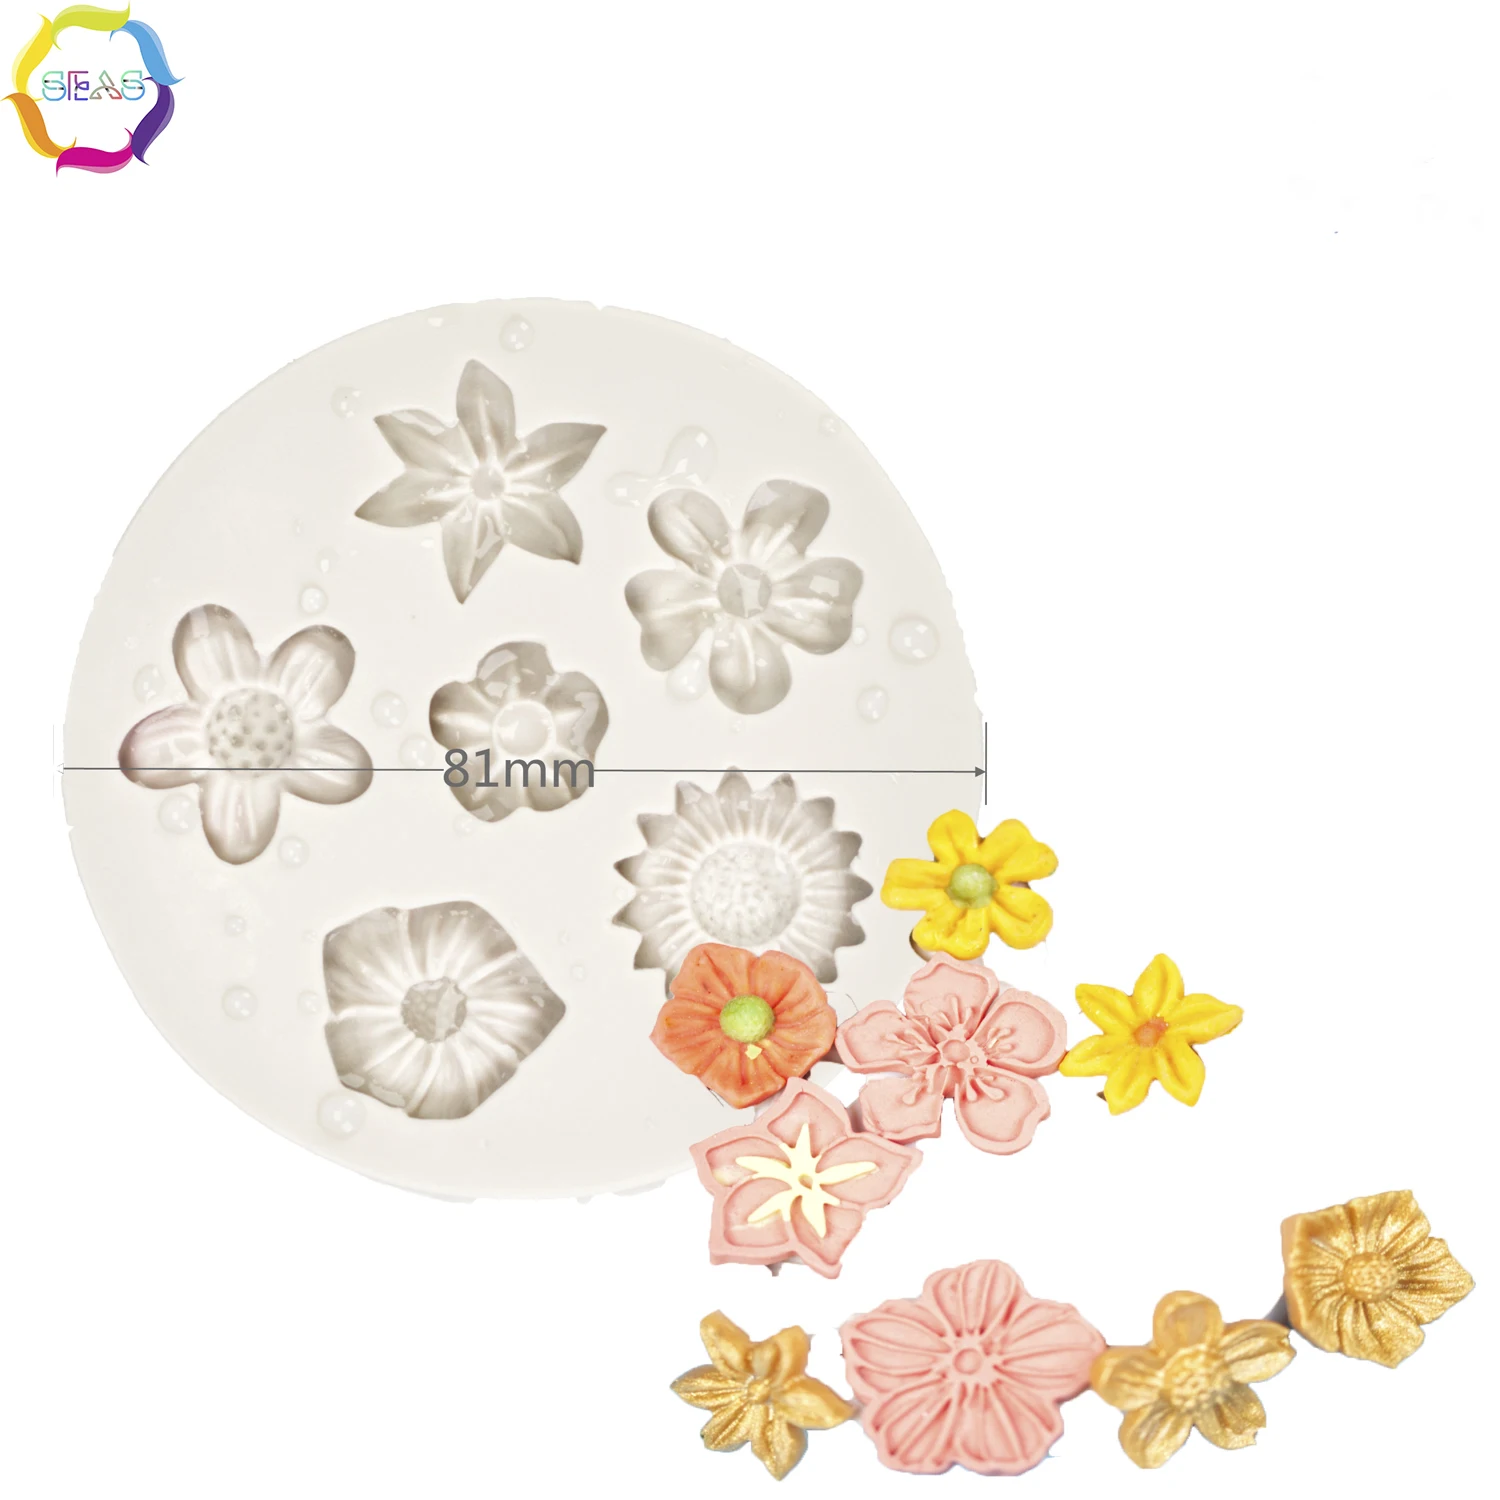 

Flower Silicone Fondant Cake Mold Rose Sunflower Cupcake Jelly Candy Chocolate Decoration For Baking Resin Tool Moulds